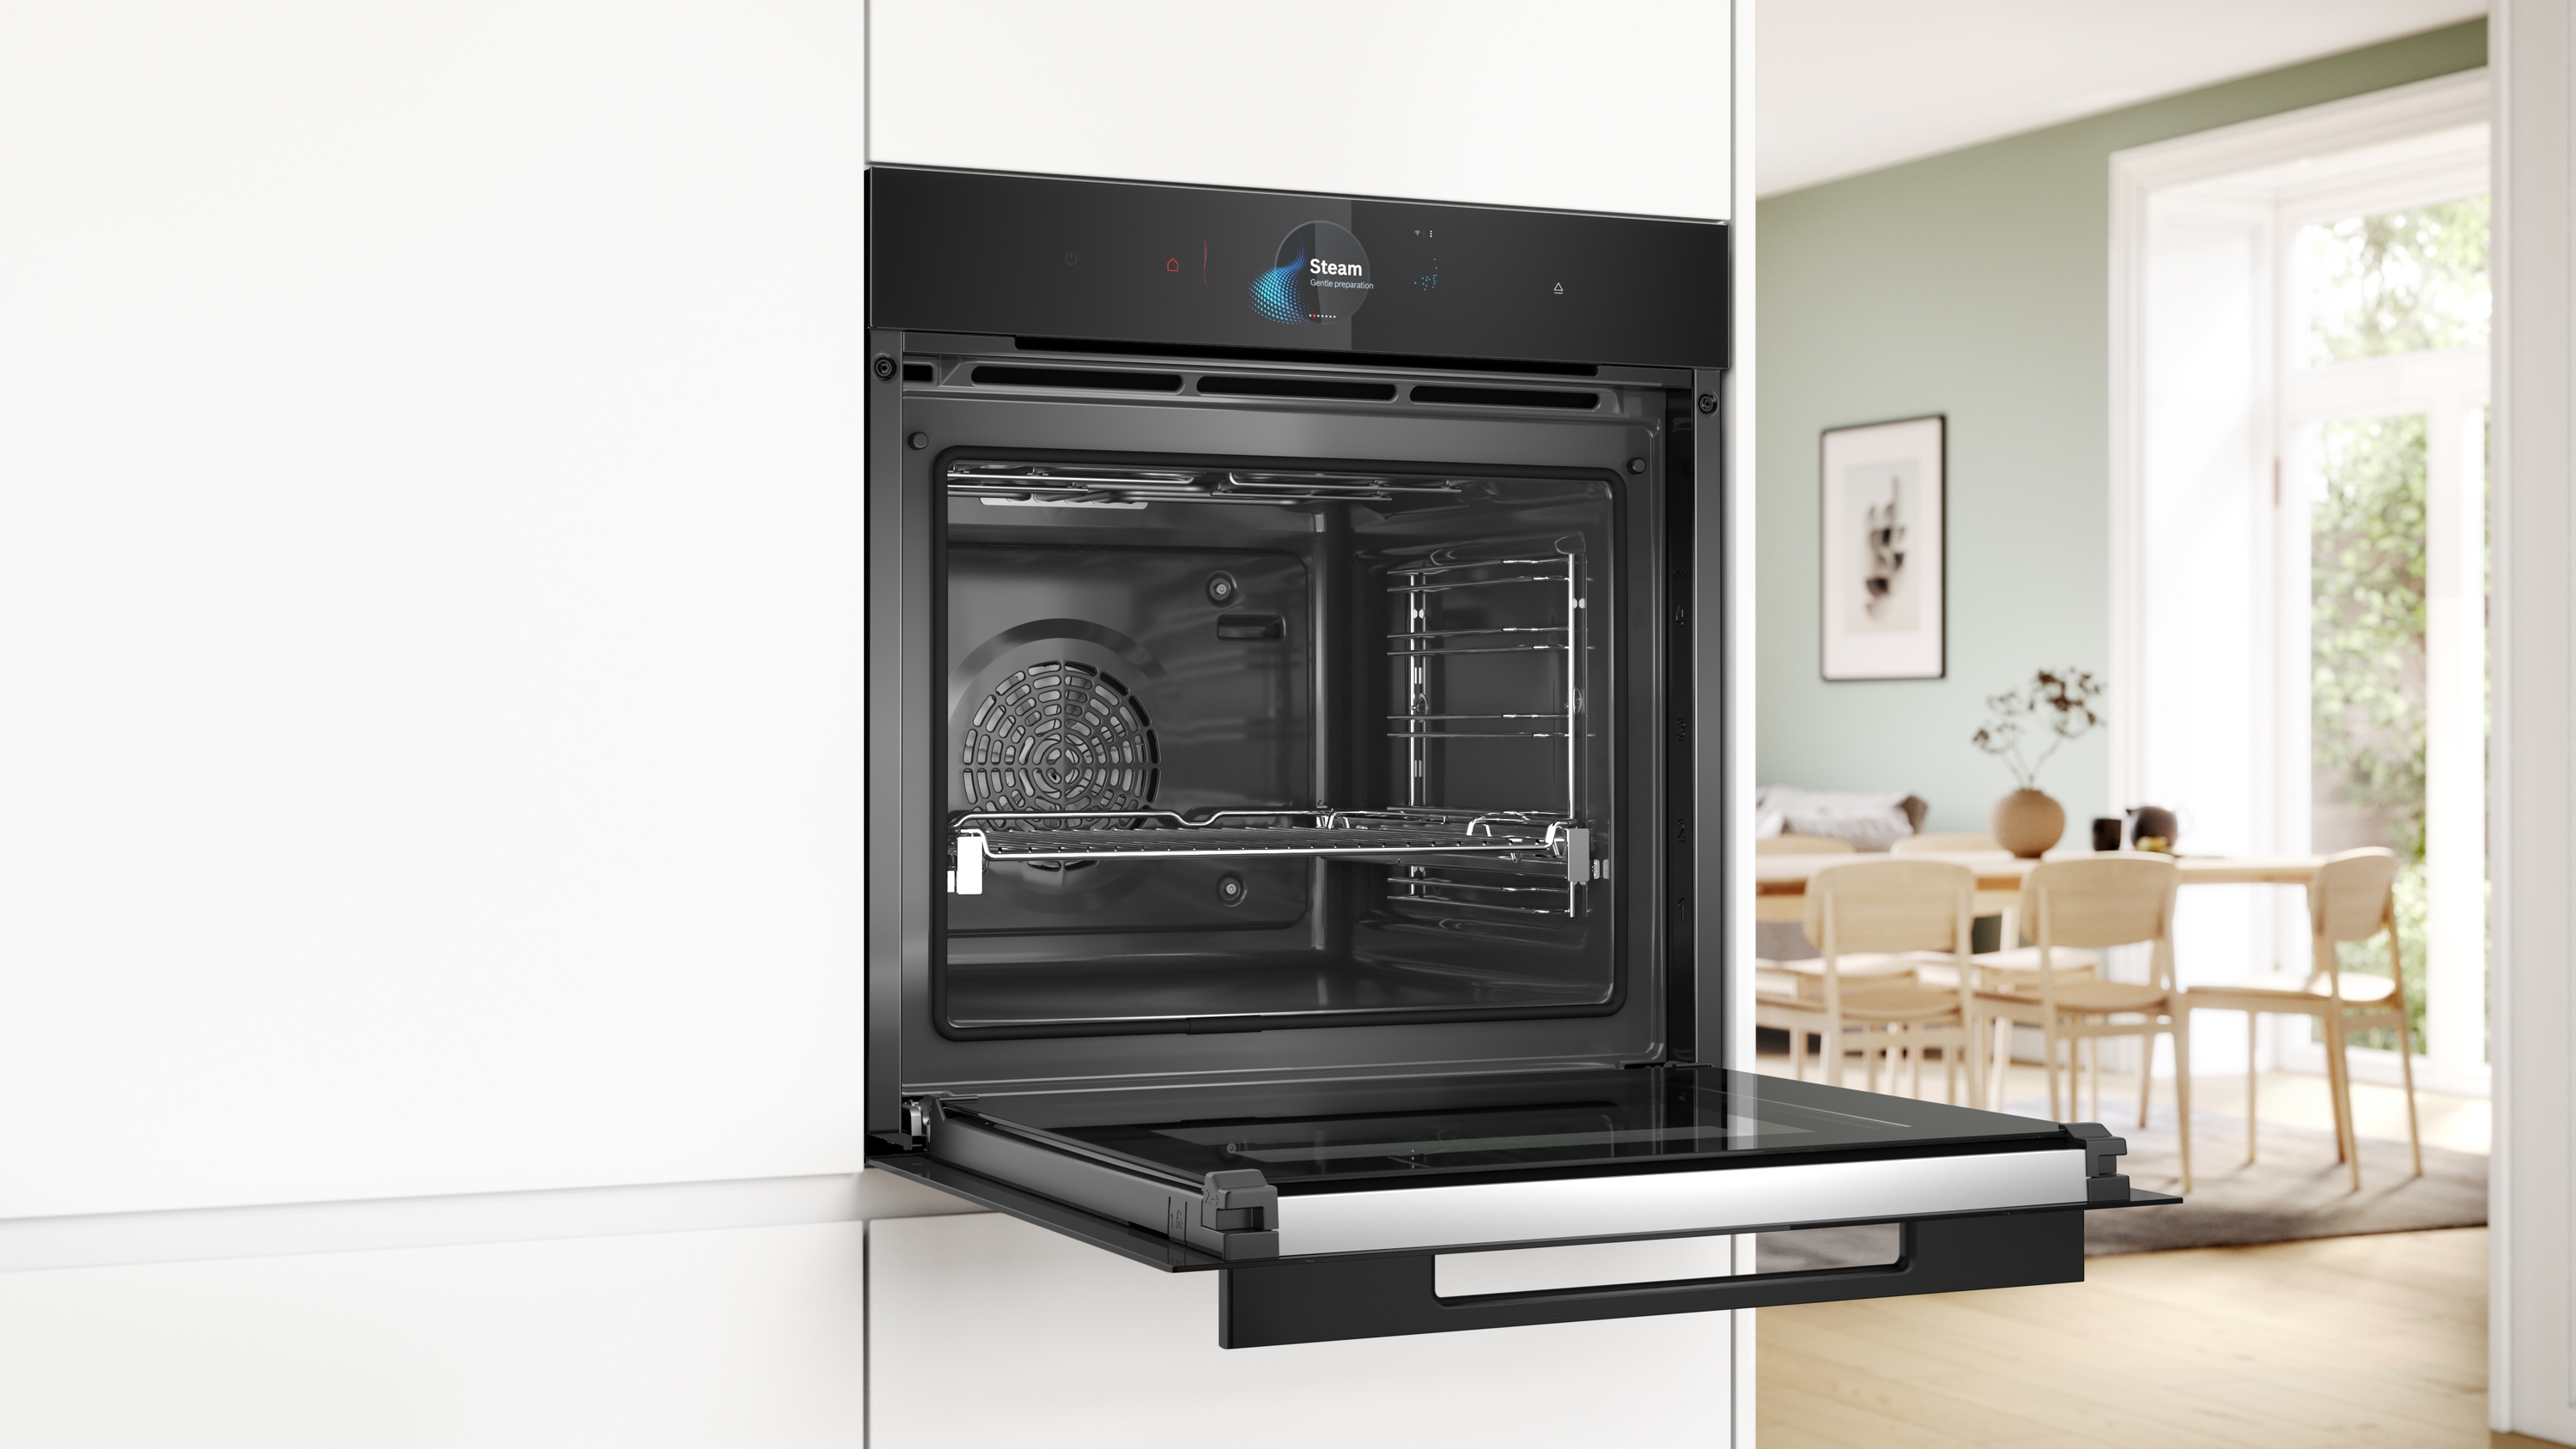 Series 8, Built-in oven with added steam function, 60 x 60 cm, Black, HRG978NB1